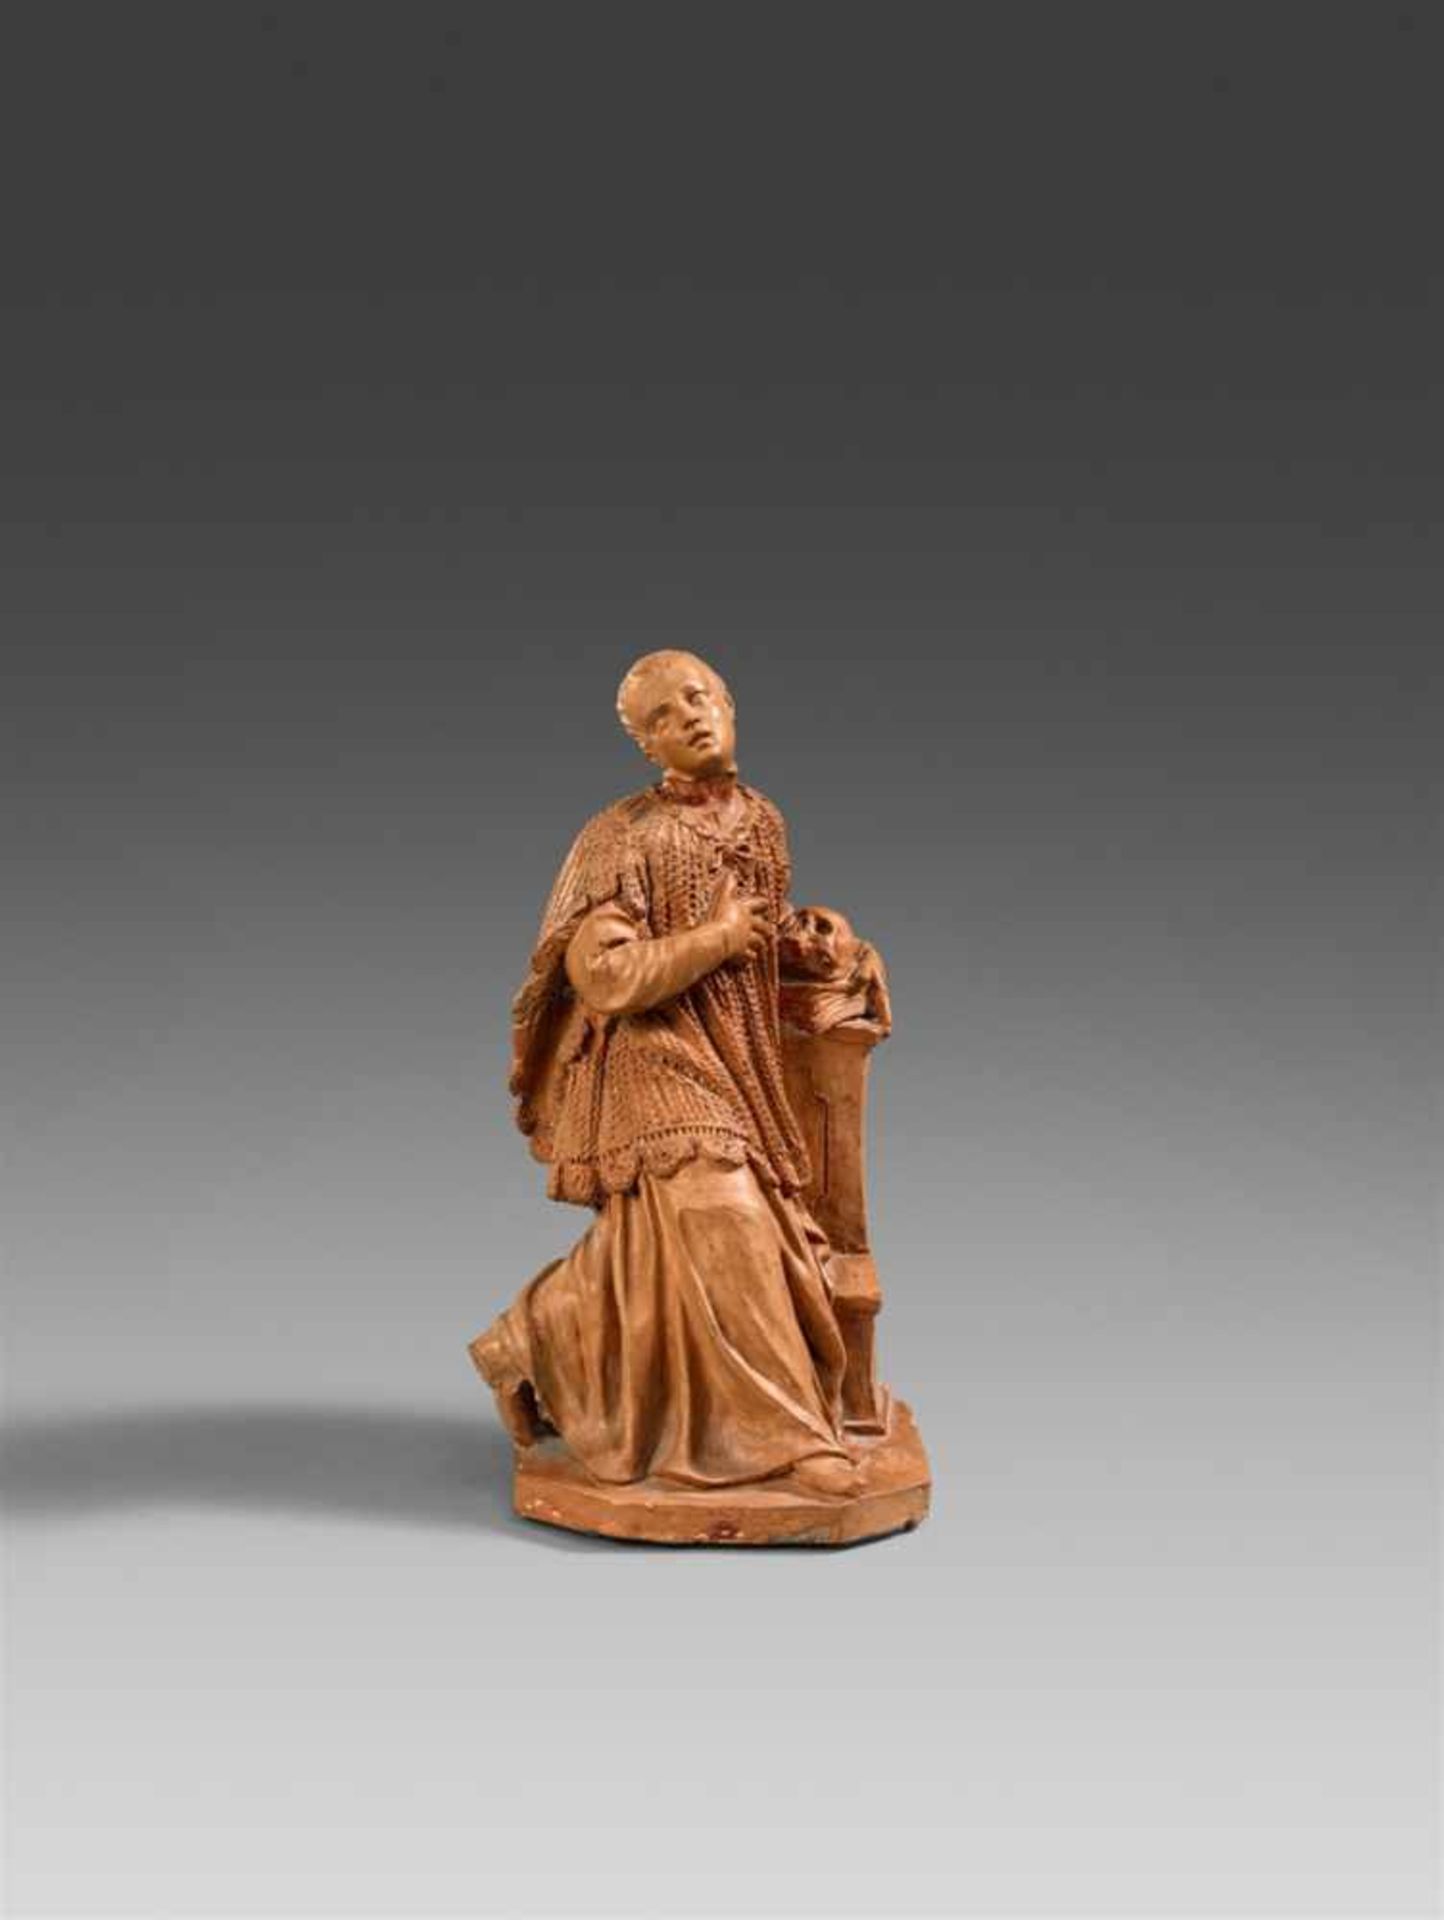 A terracotta figure of Saint Aloysius Gonzaga, attributed to Pierre Legros the YoungerWorked in